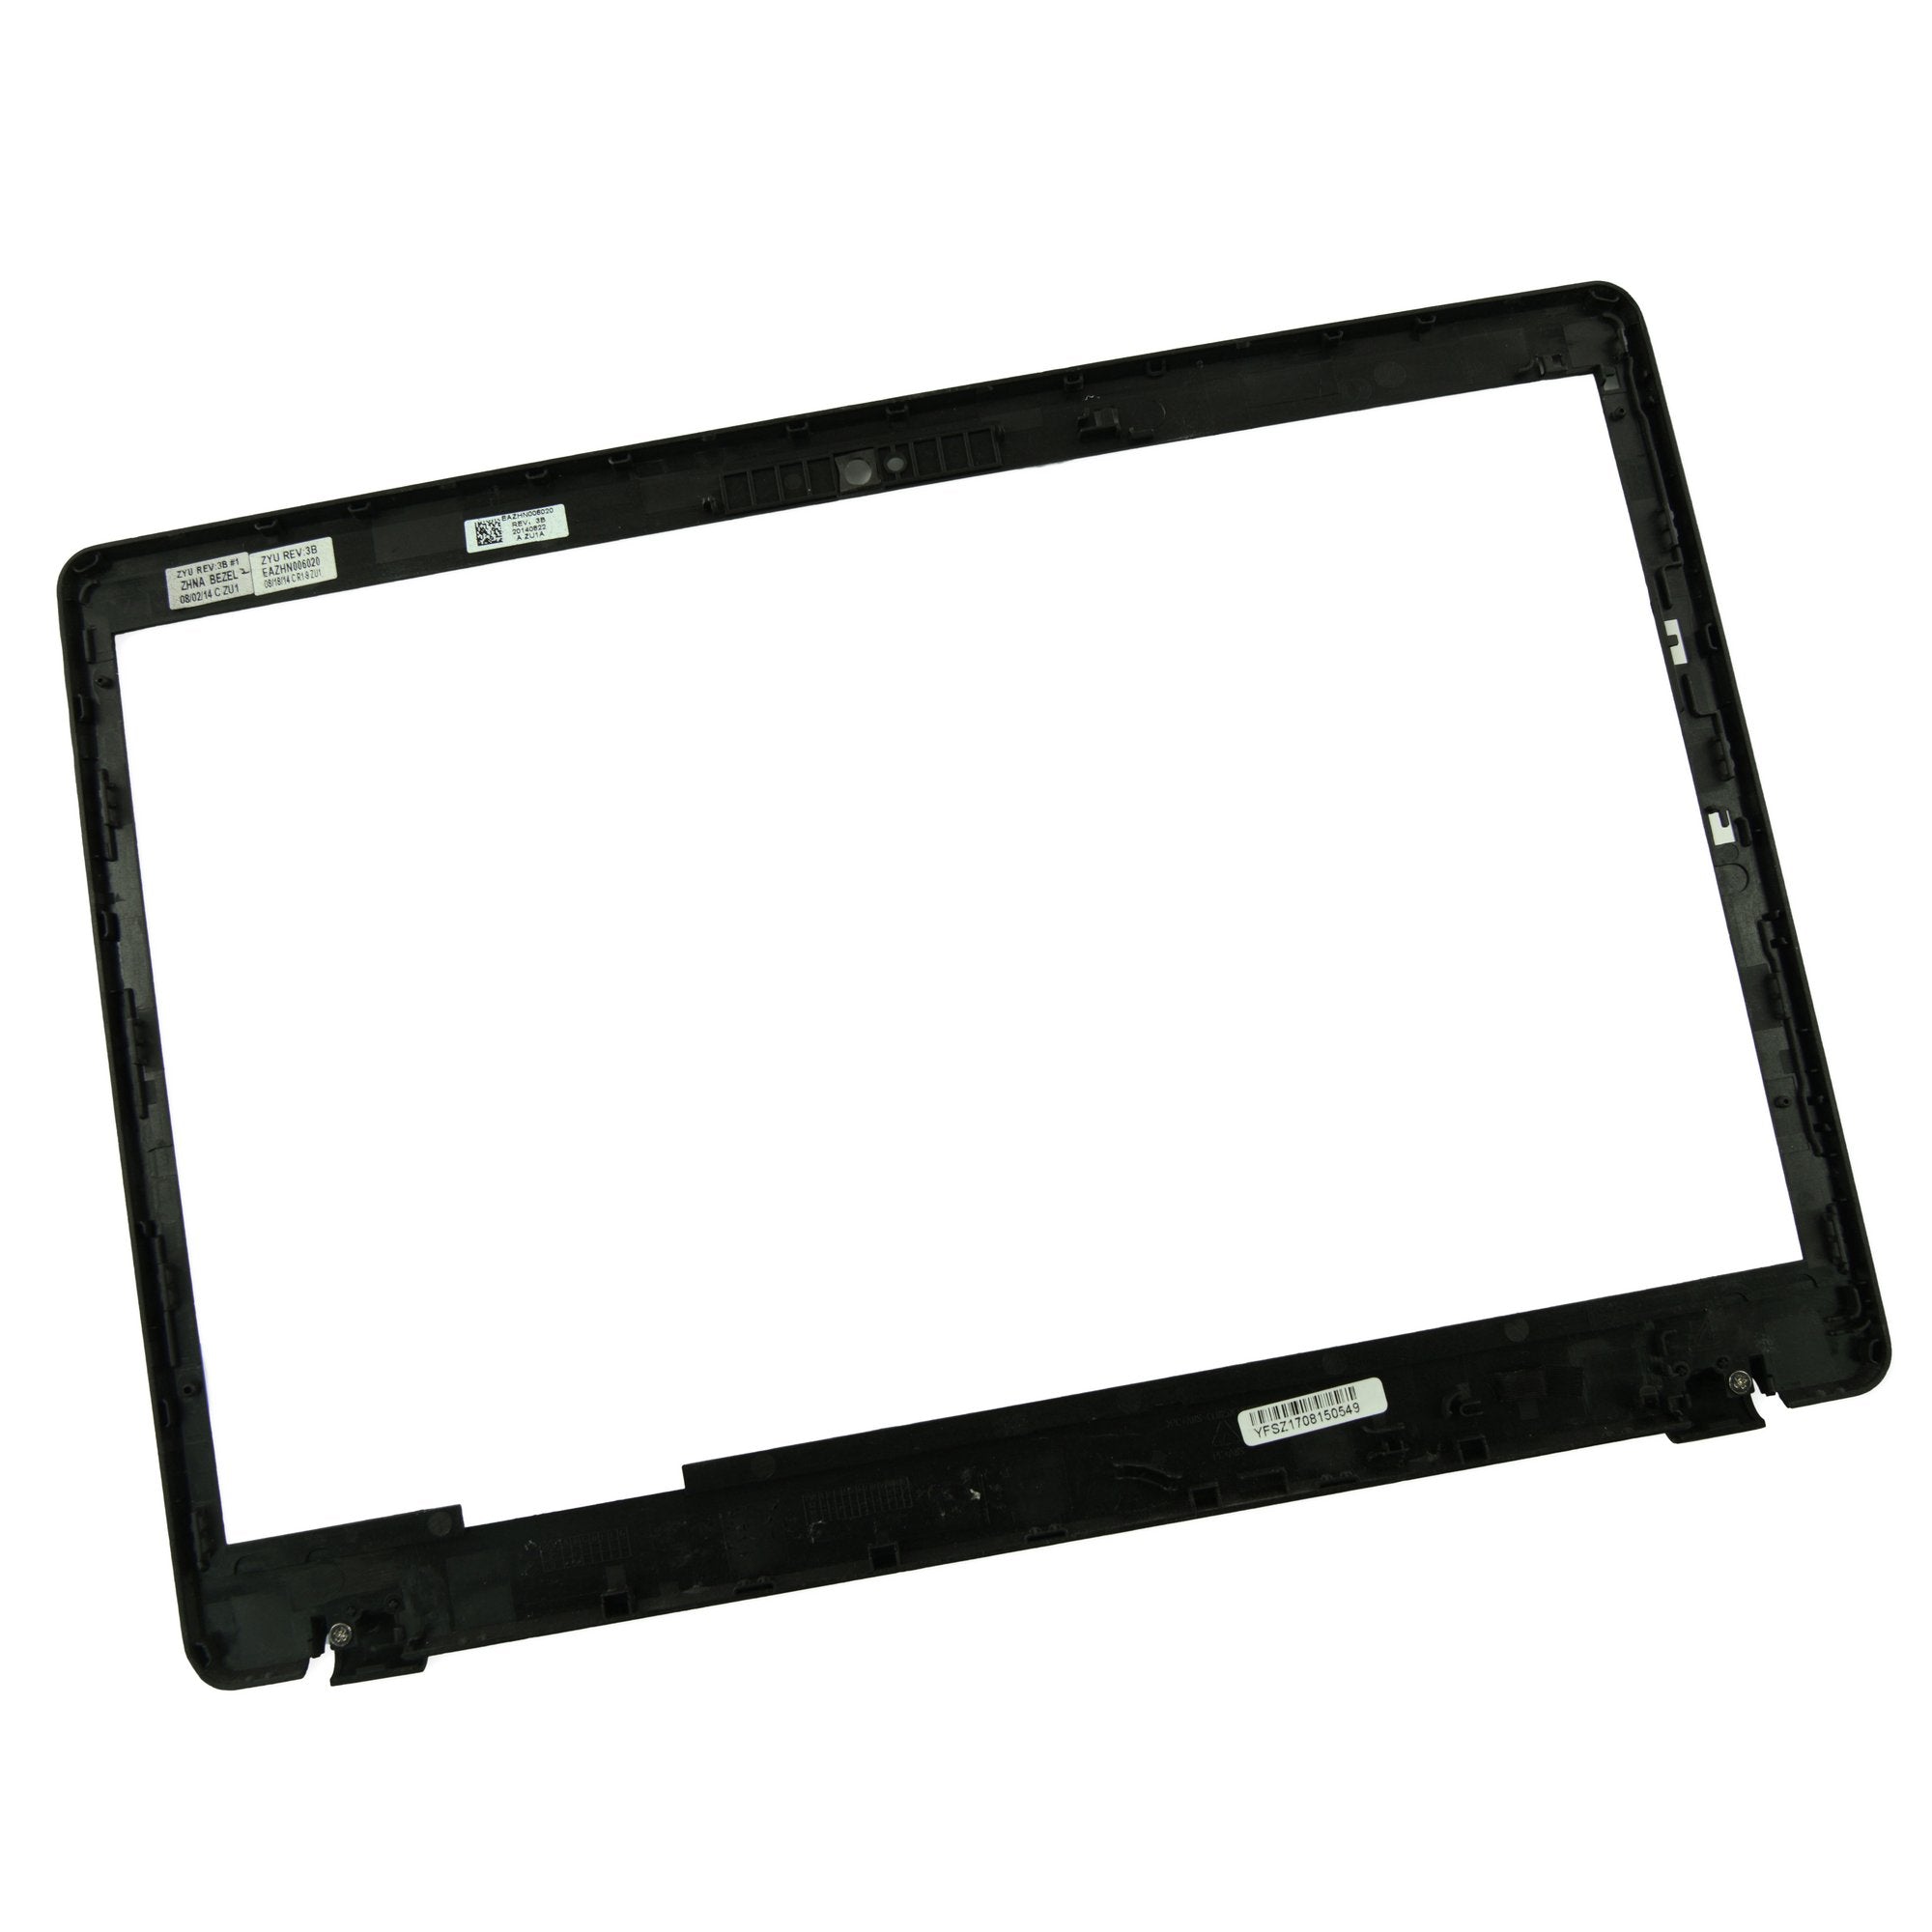 Acer Chromebook C720P LCD Bezel Used, A-Stock